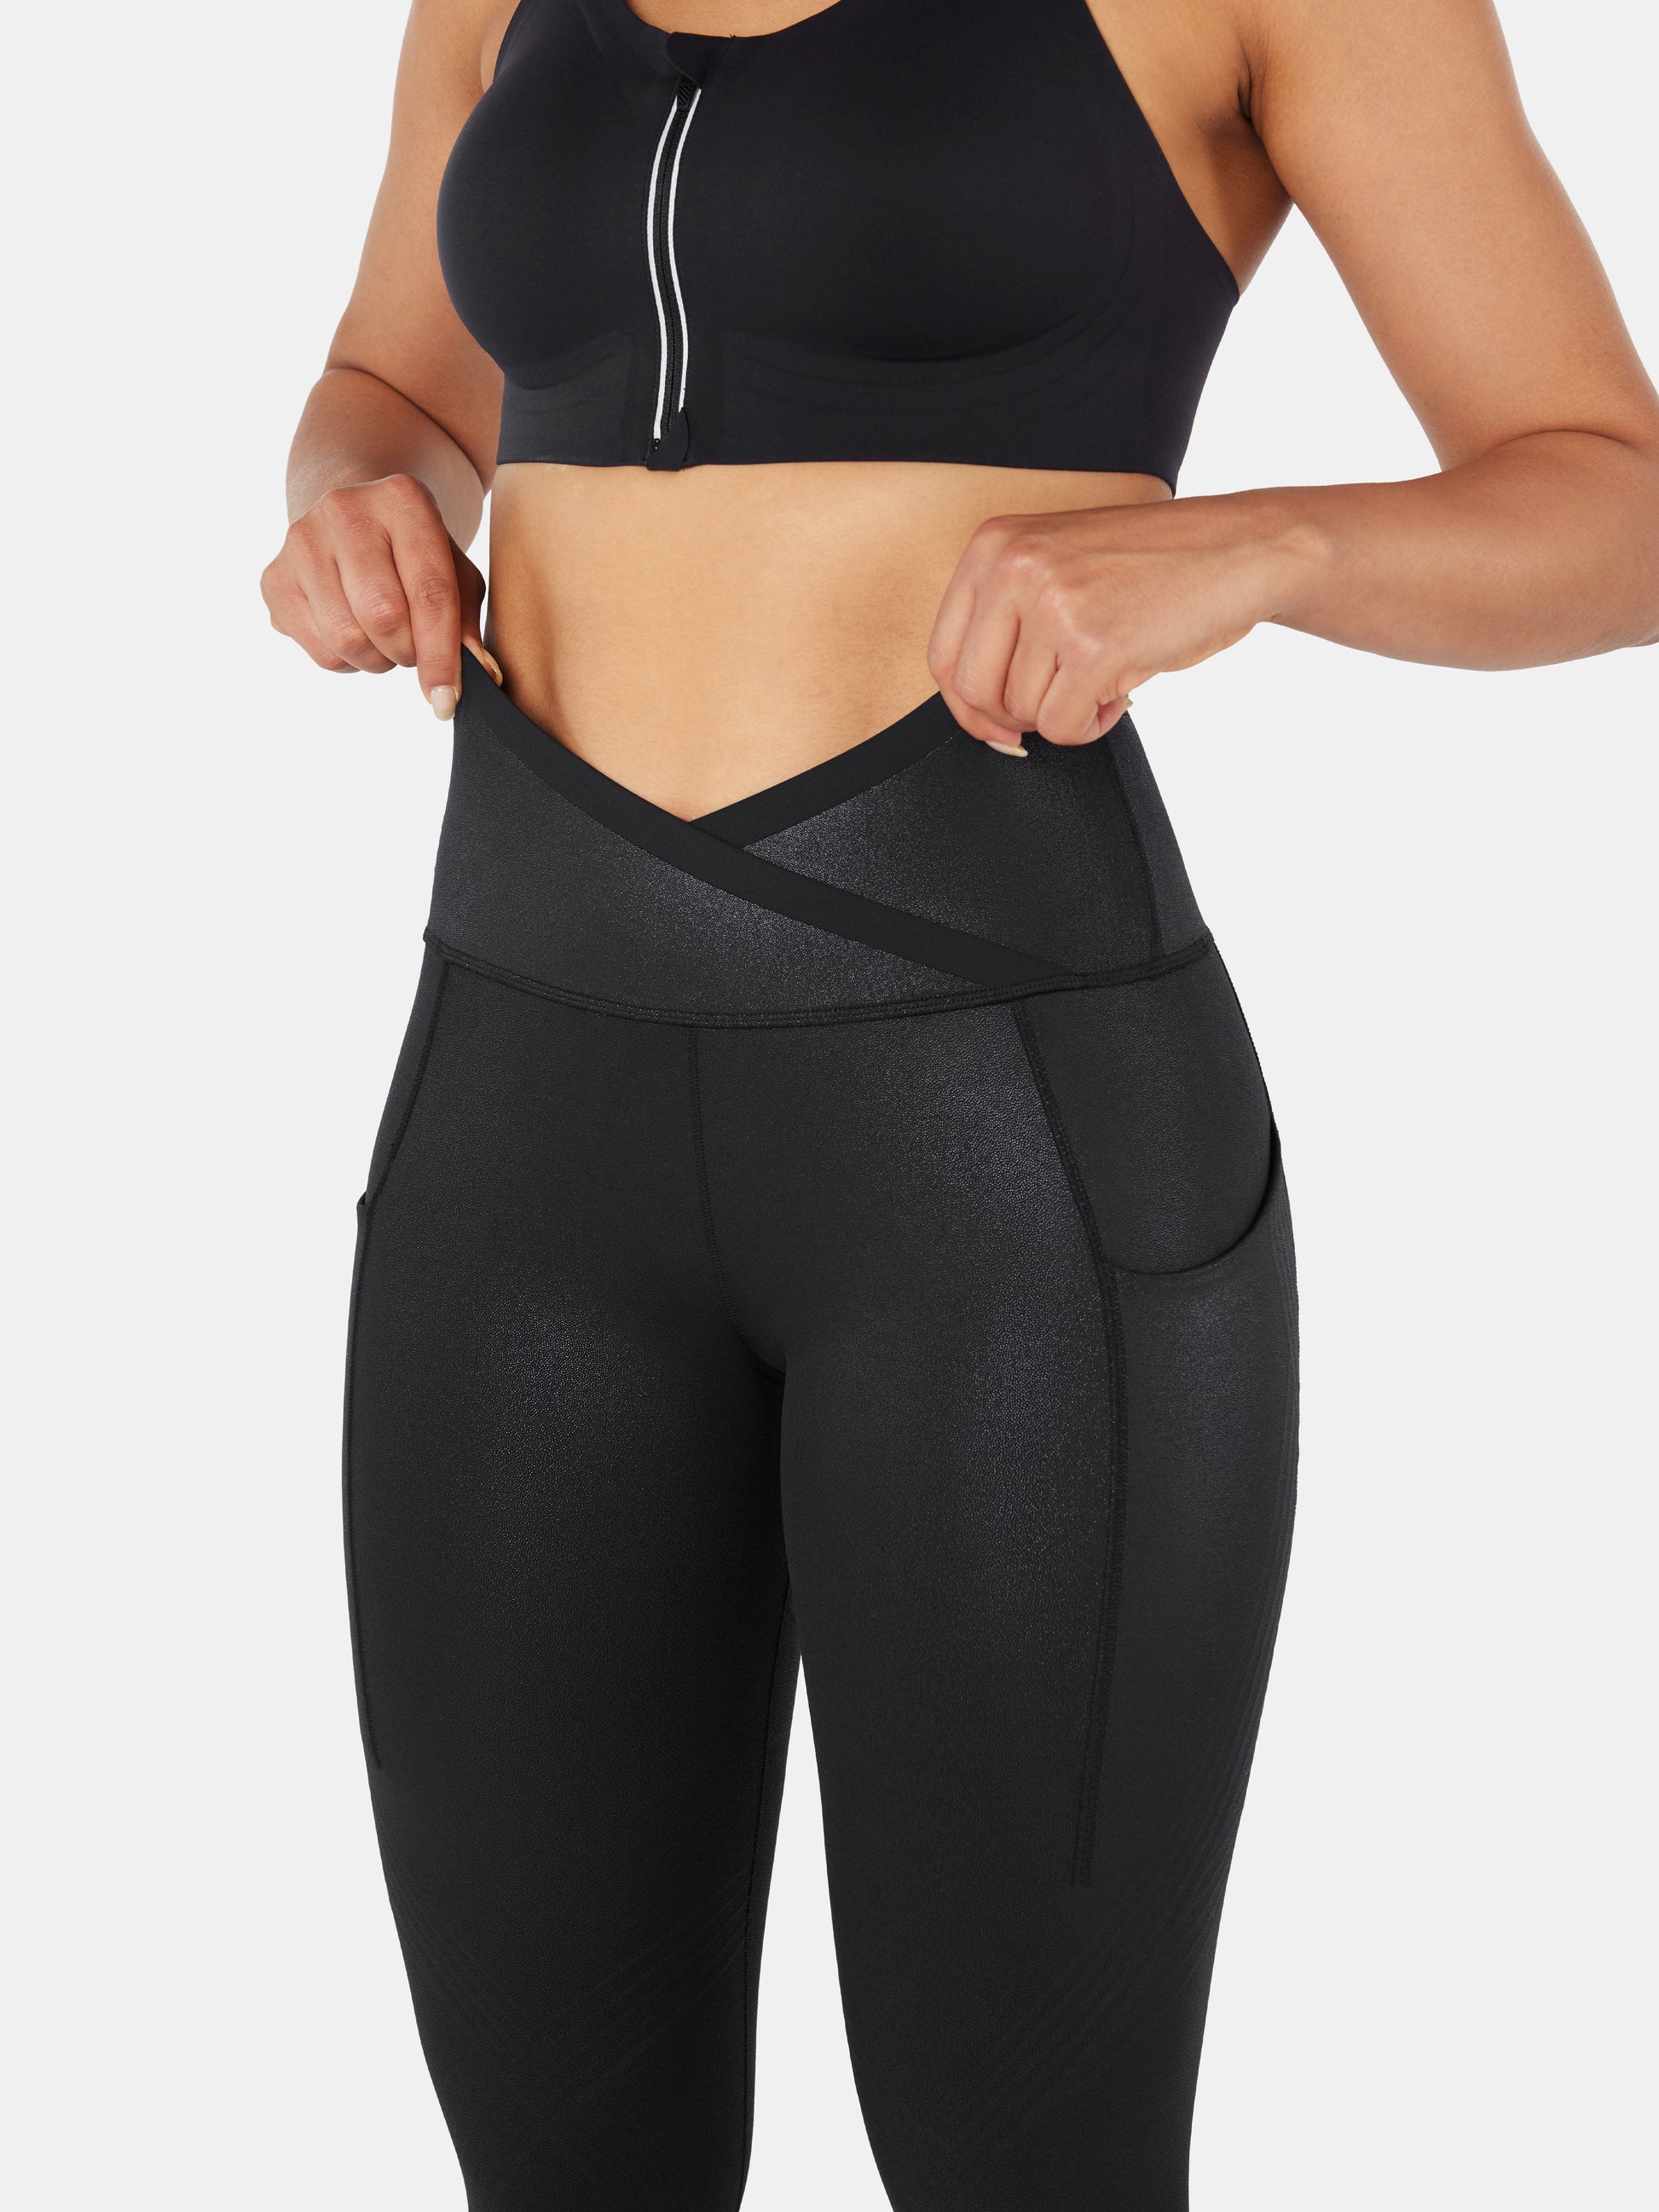  Fanka Compression Body Sculpt Side Pocket Leggings for Women No  See Through Reversible Wear High Waisted Yoga Pants Workout Black :  Clothing, Shoes & Jewelry